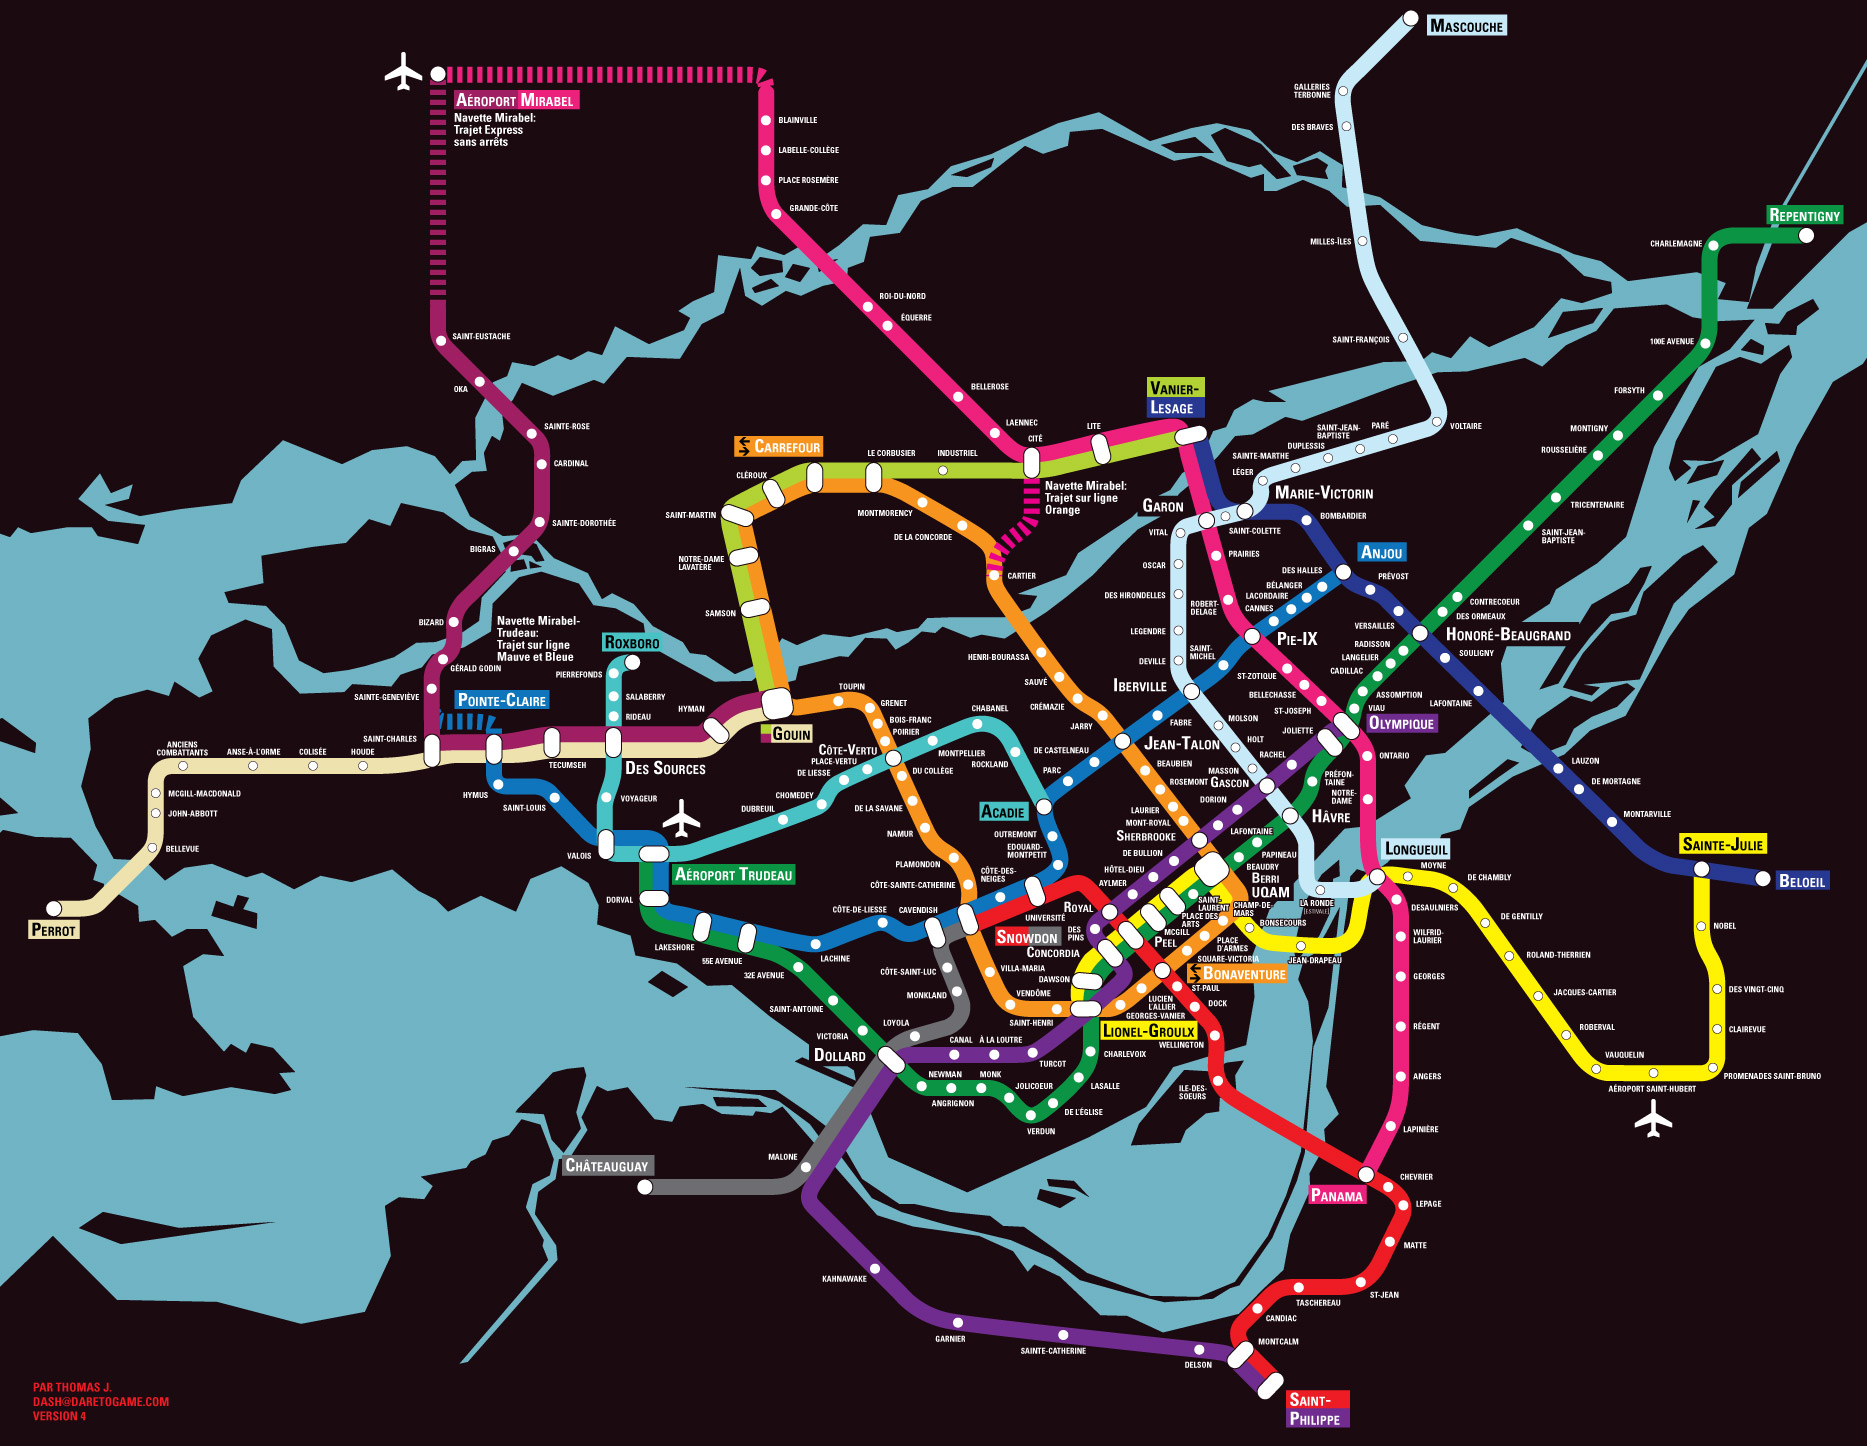 Discussion: If you could add another line to the metro...